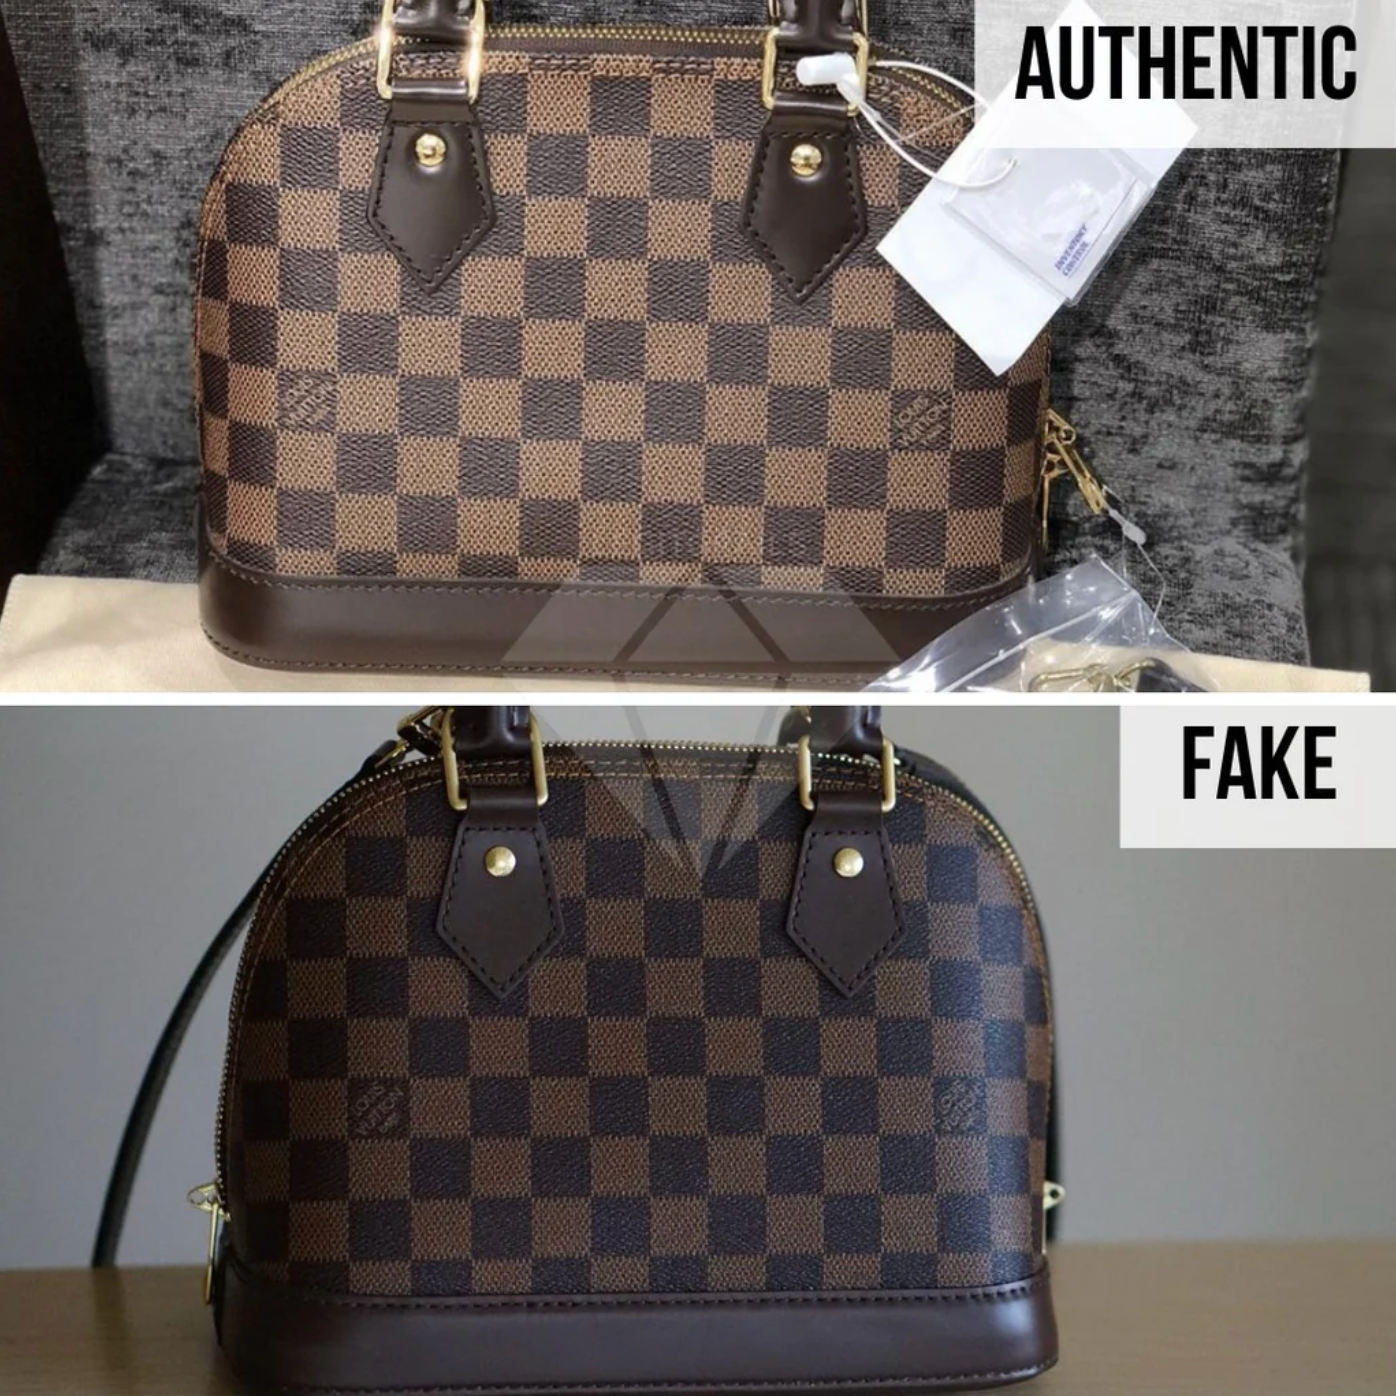 Difference between genuine and fake luxury products  Louis Vuitton  stitches  ET Retail